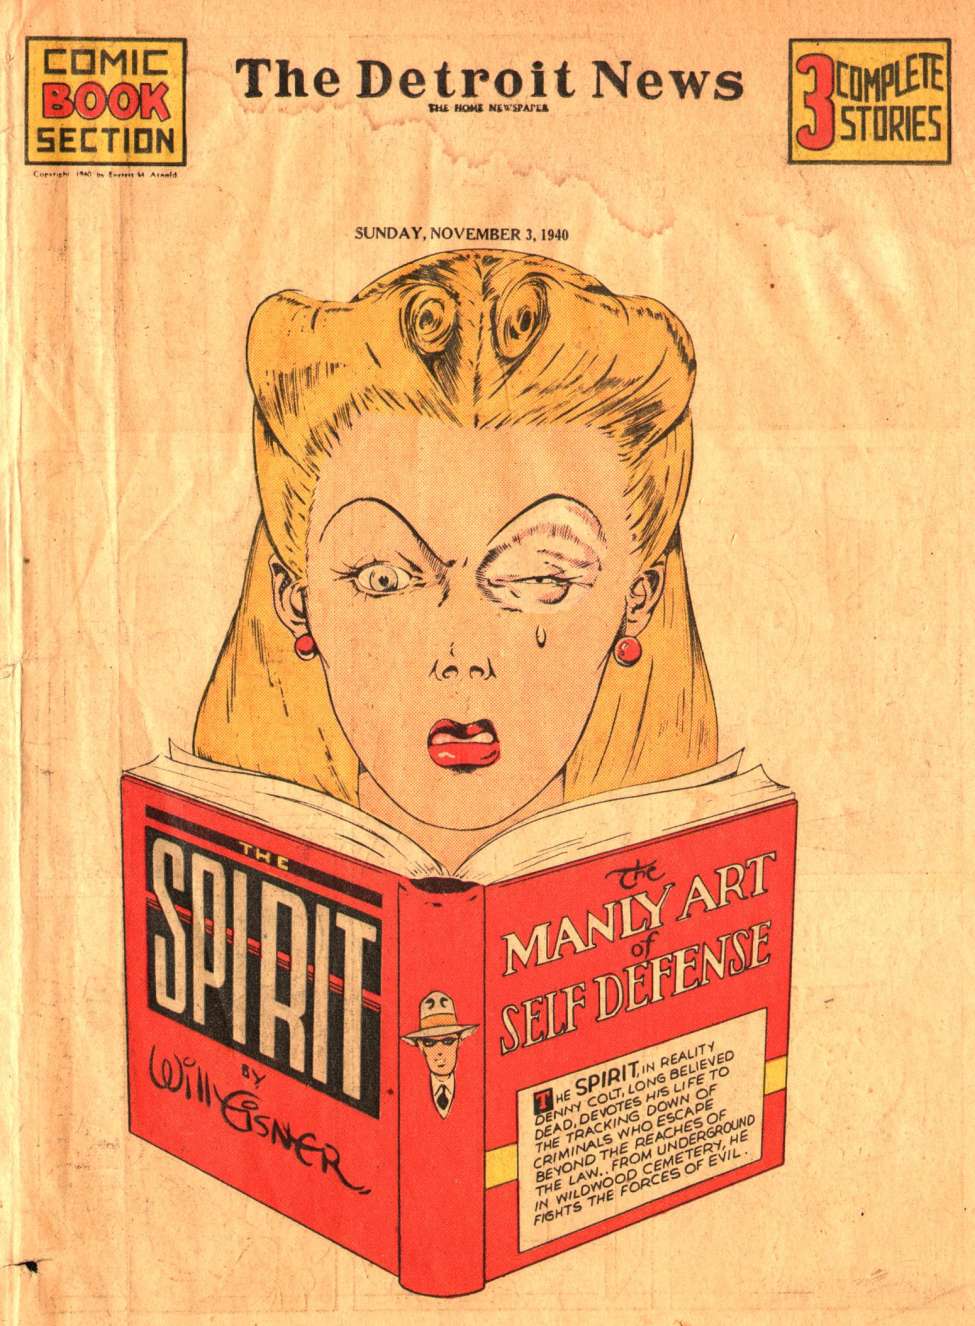 Comic Book Cover For The Spirit (1940-11-03) - Detroit News